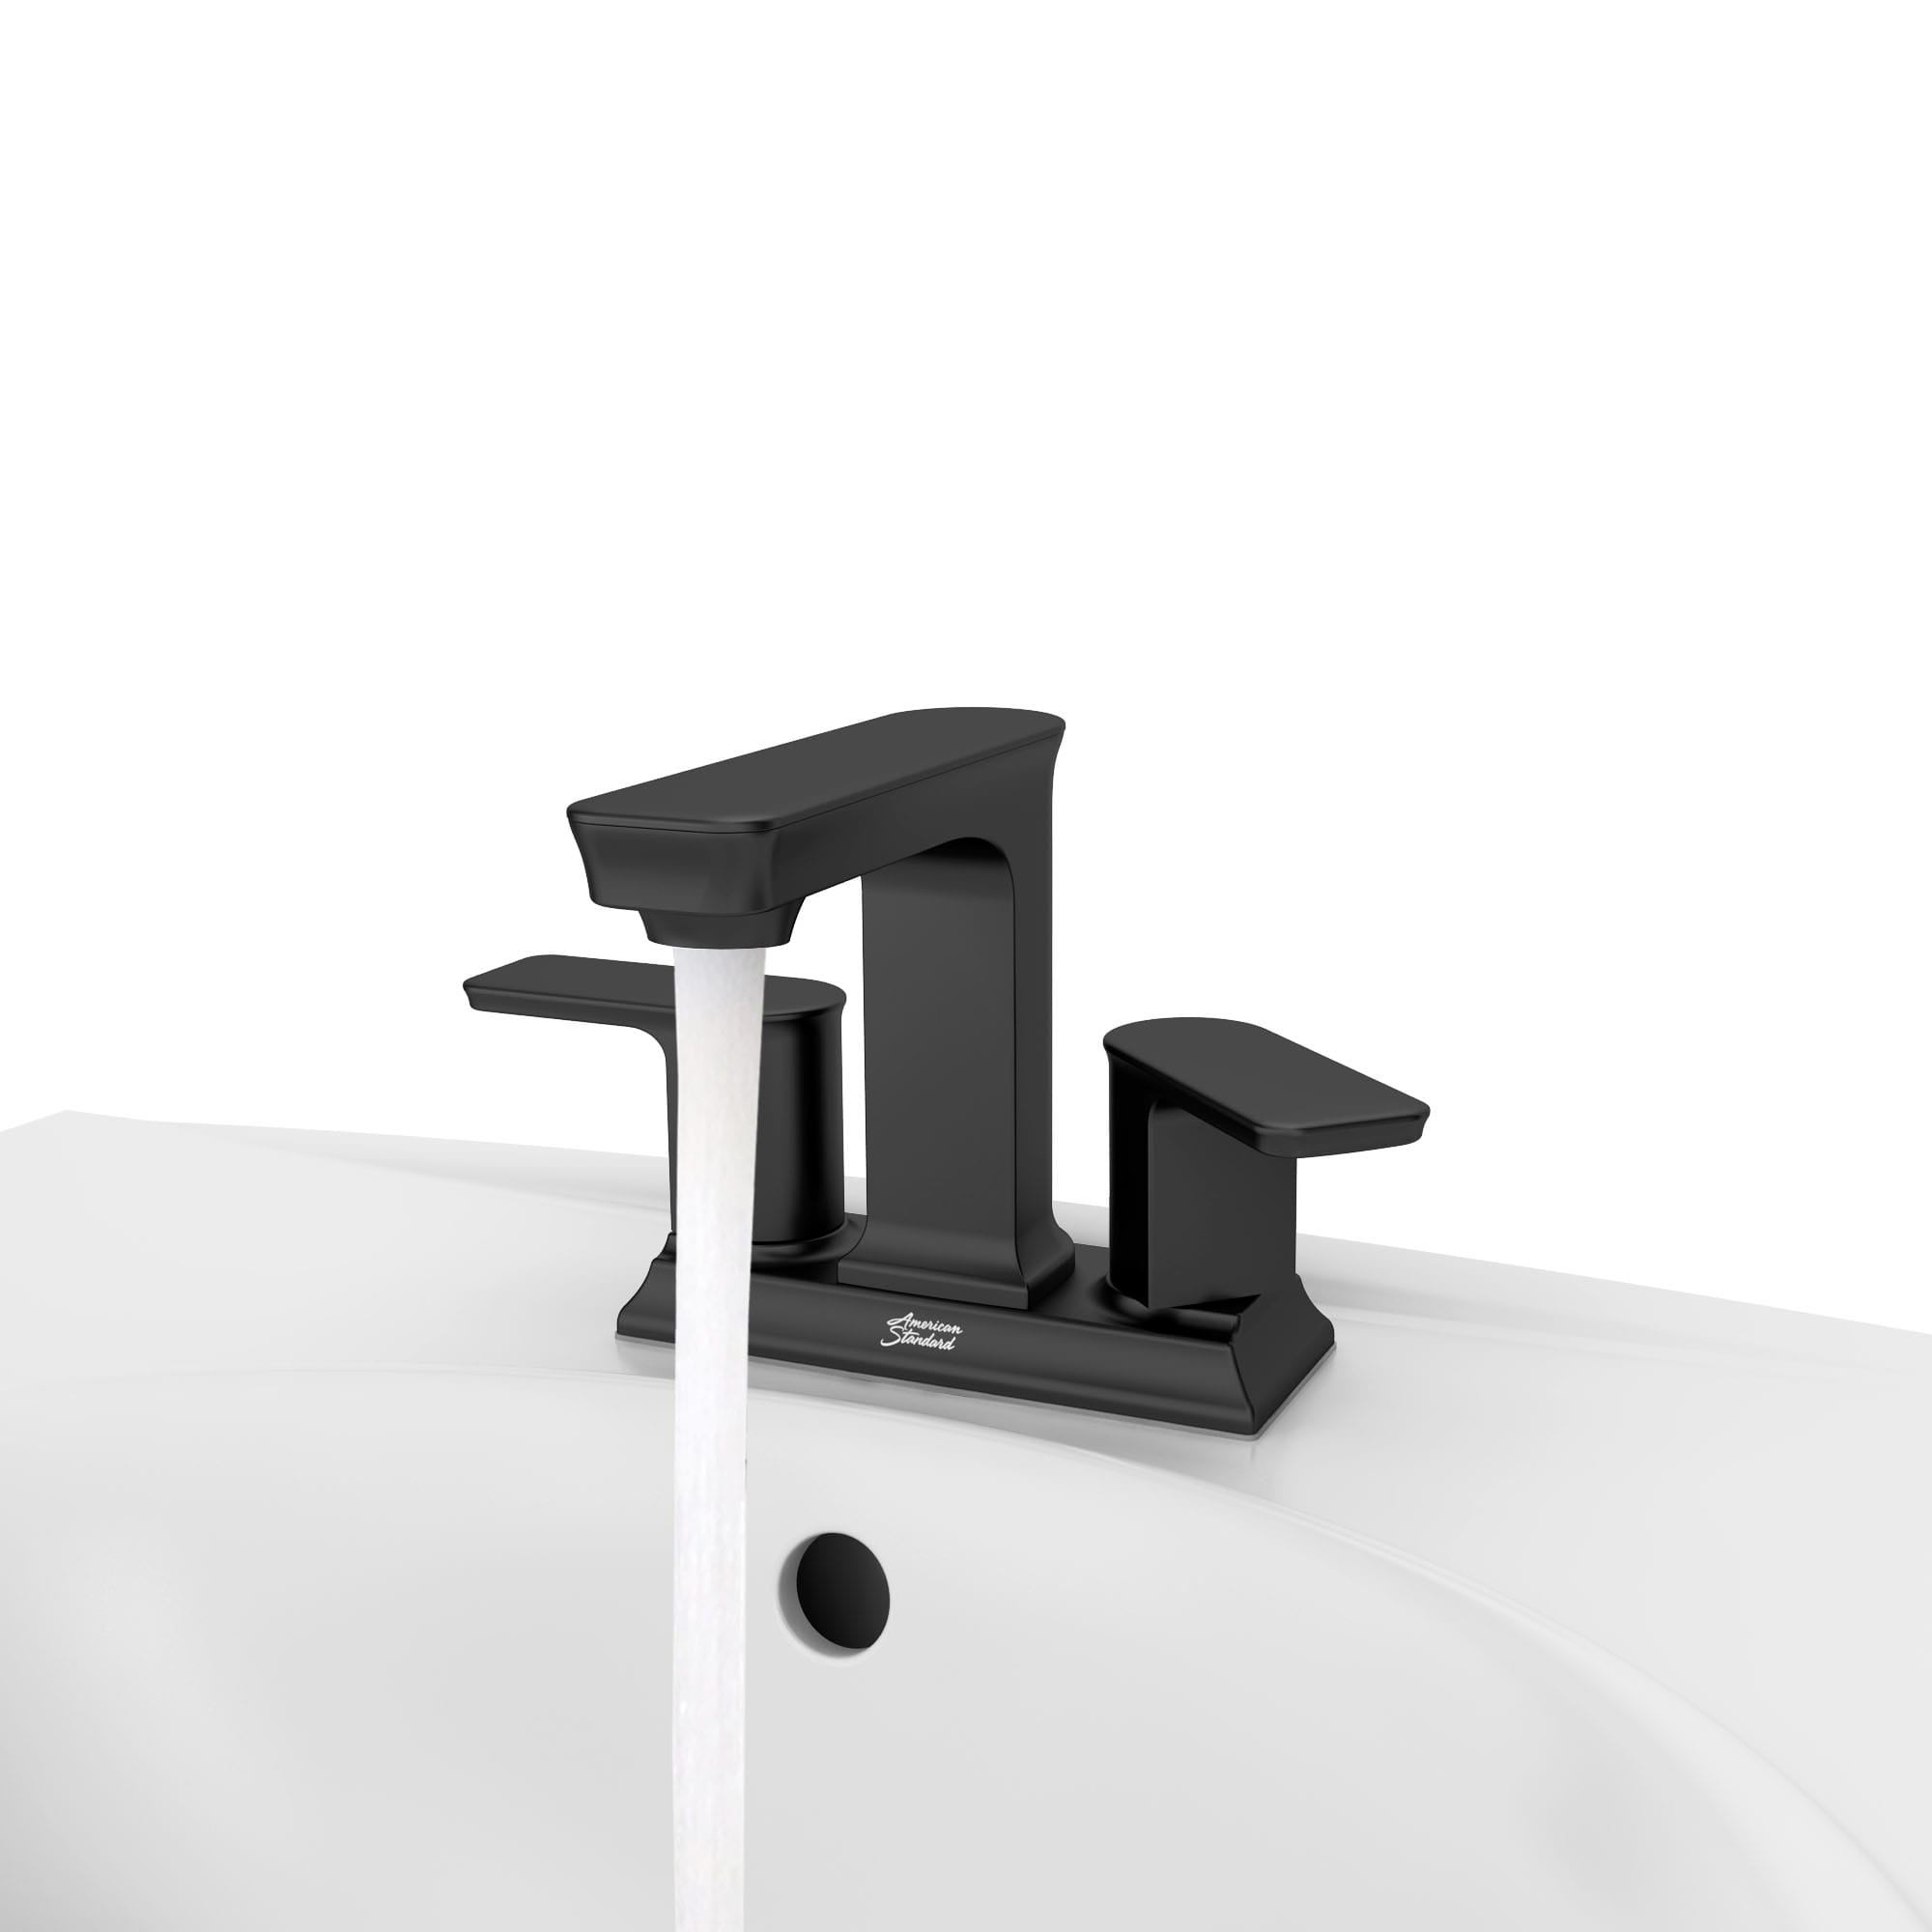 Forsey® 4-Inch Centerset 2-Handle Bathroom Faucet 1.2 gpm/4.5 L/min With Lever Handles